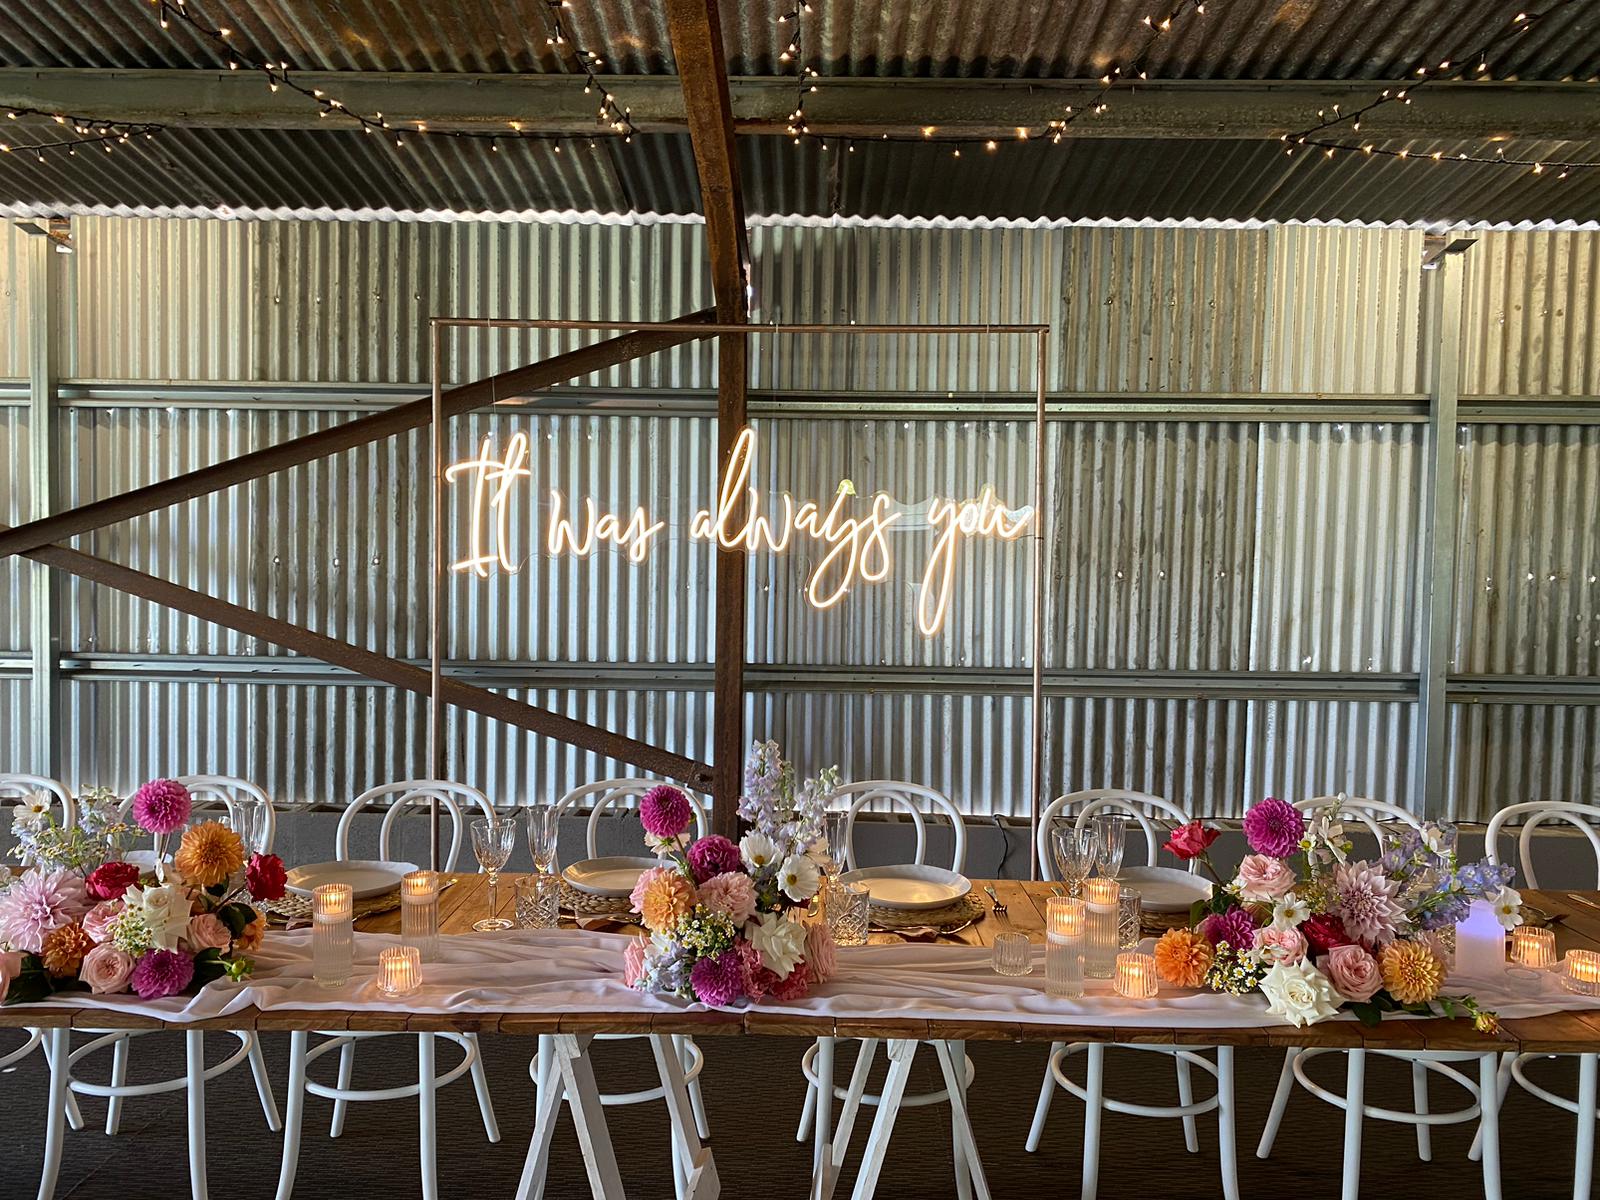 Rustic Timber Tables and Florals with White Bentwood Chairs for Wedding Reception